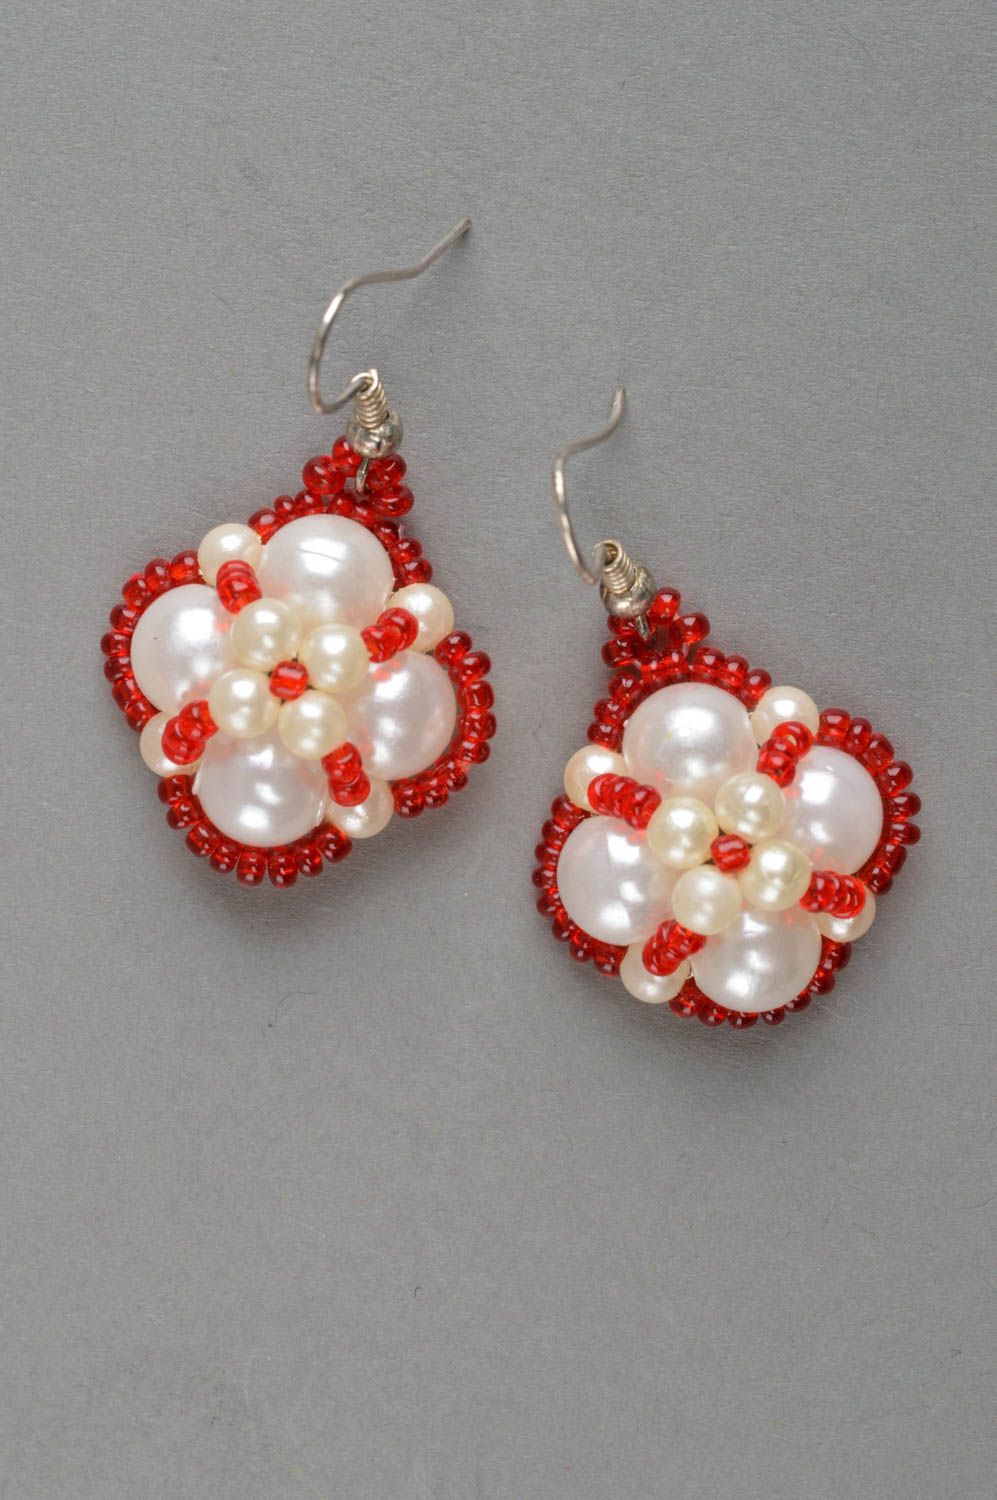 Handmade beaded earrings red and white accessories unusual designer jewelry photo 2